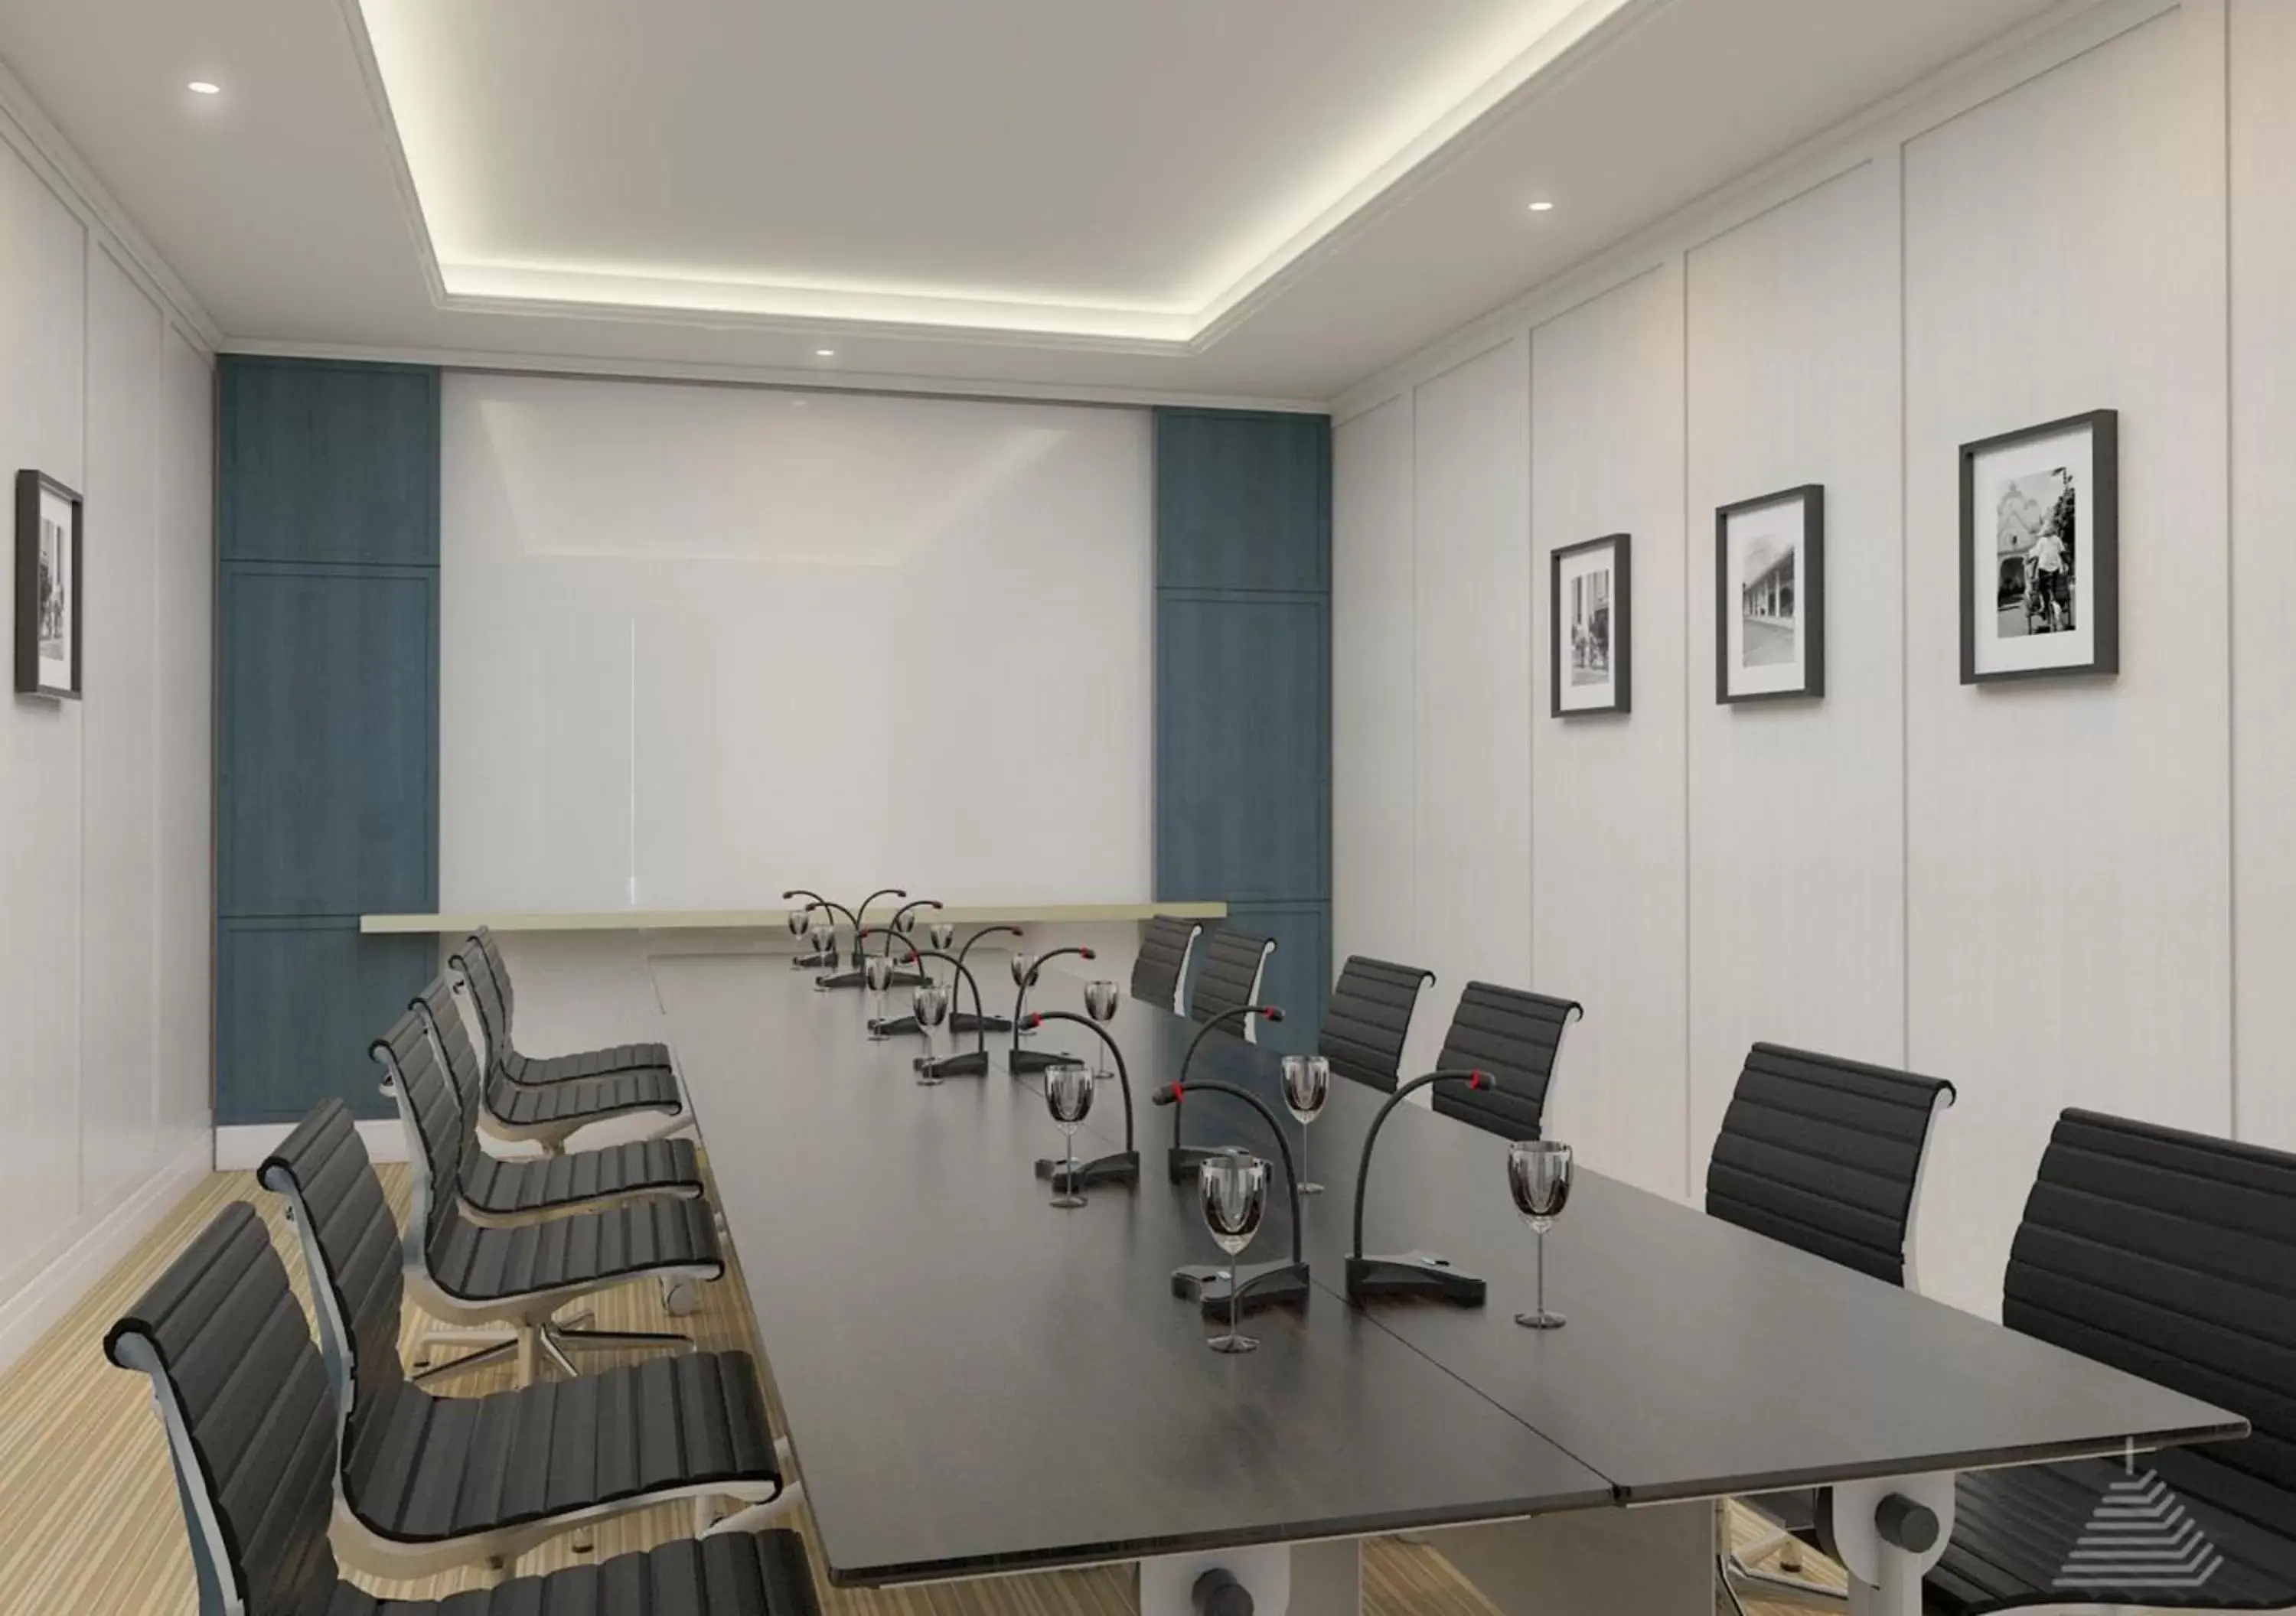 Meeting/conference room in Jambuluwuk Thamrin Hotel